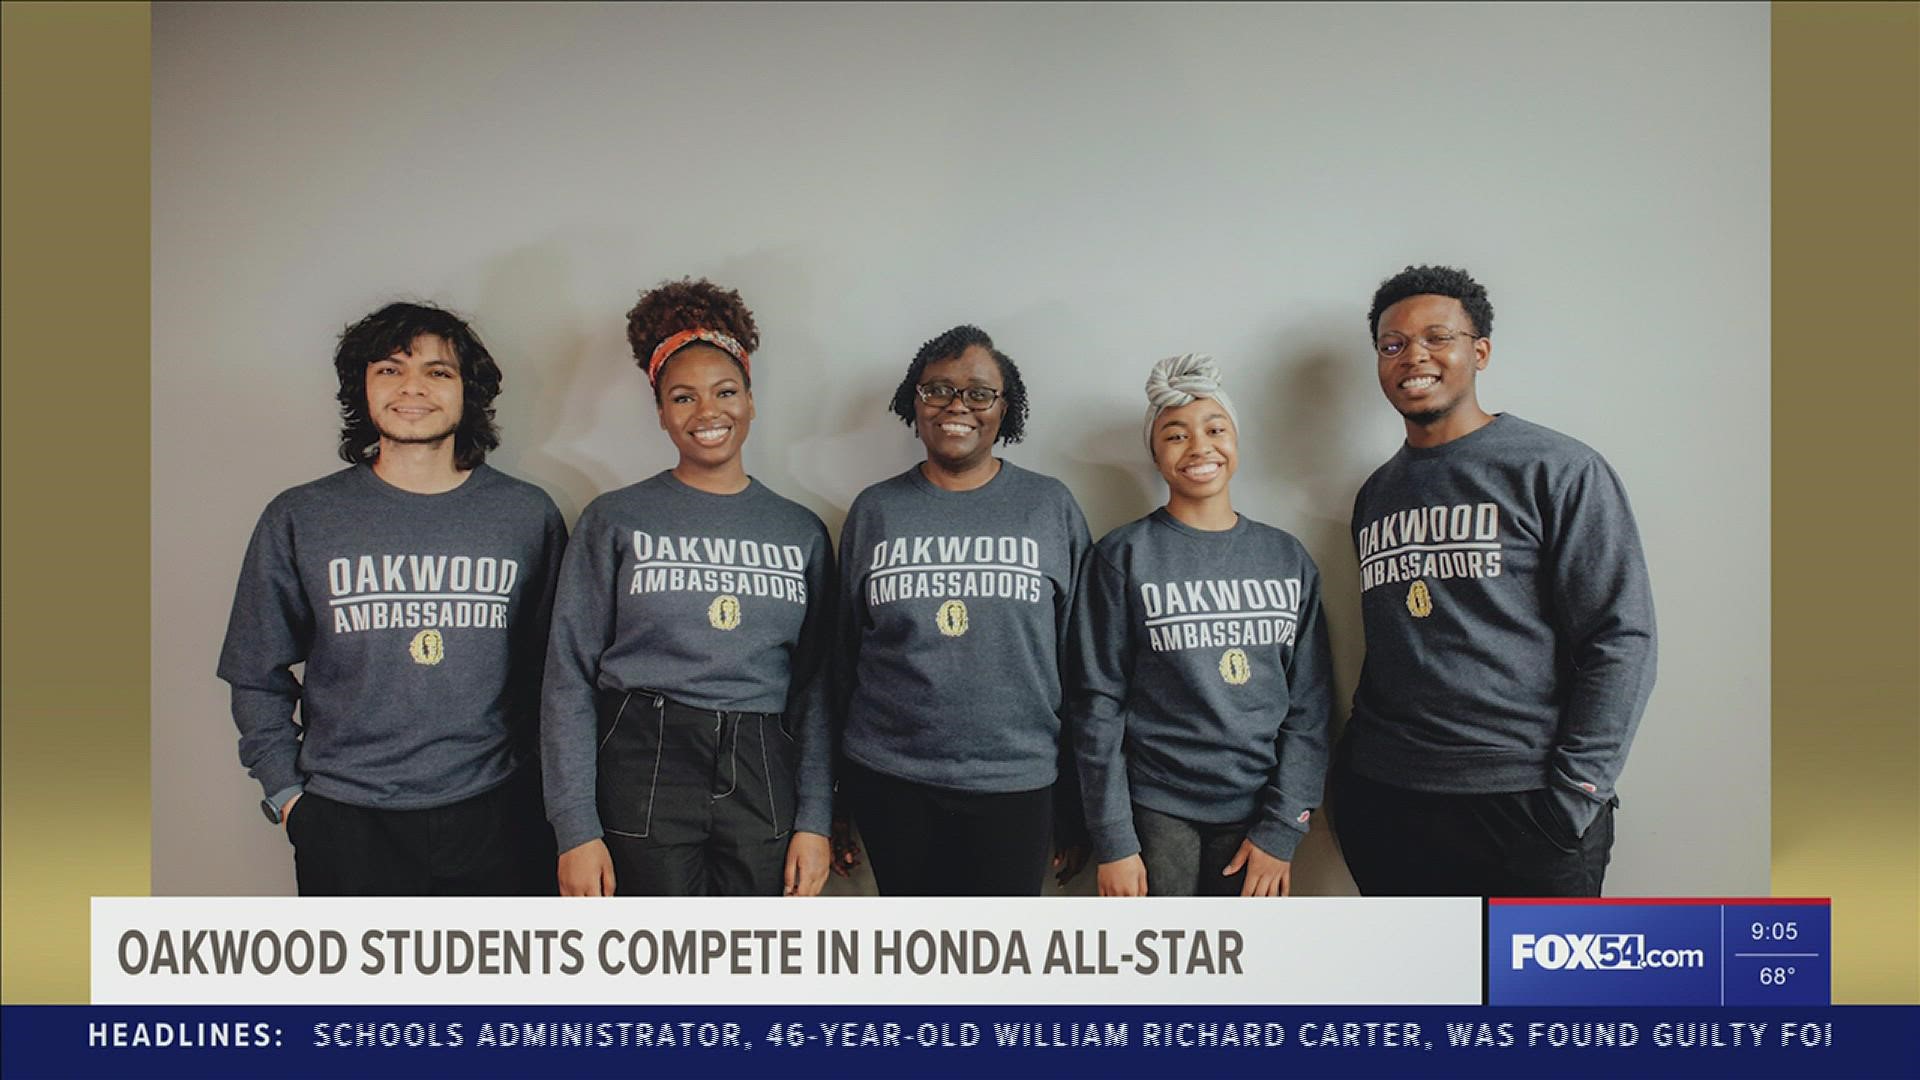 Four Oakwood University students are heading to the playoffs in the prestigious Honda Campus All-Star Challenge academic competition.